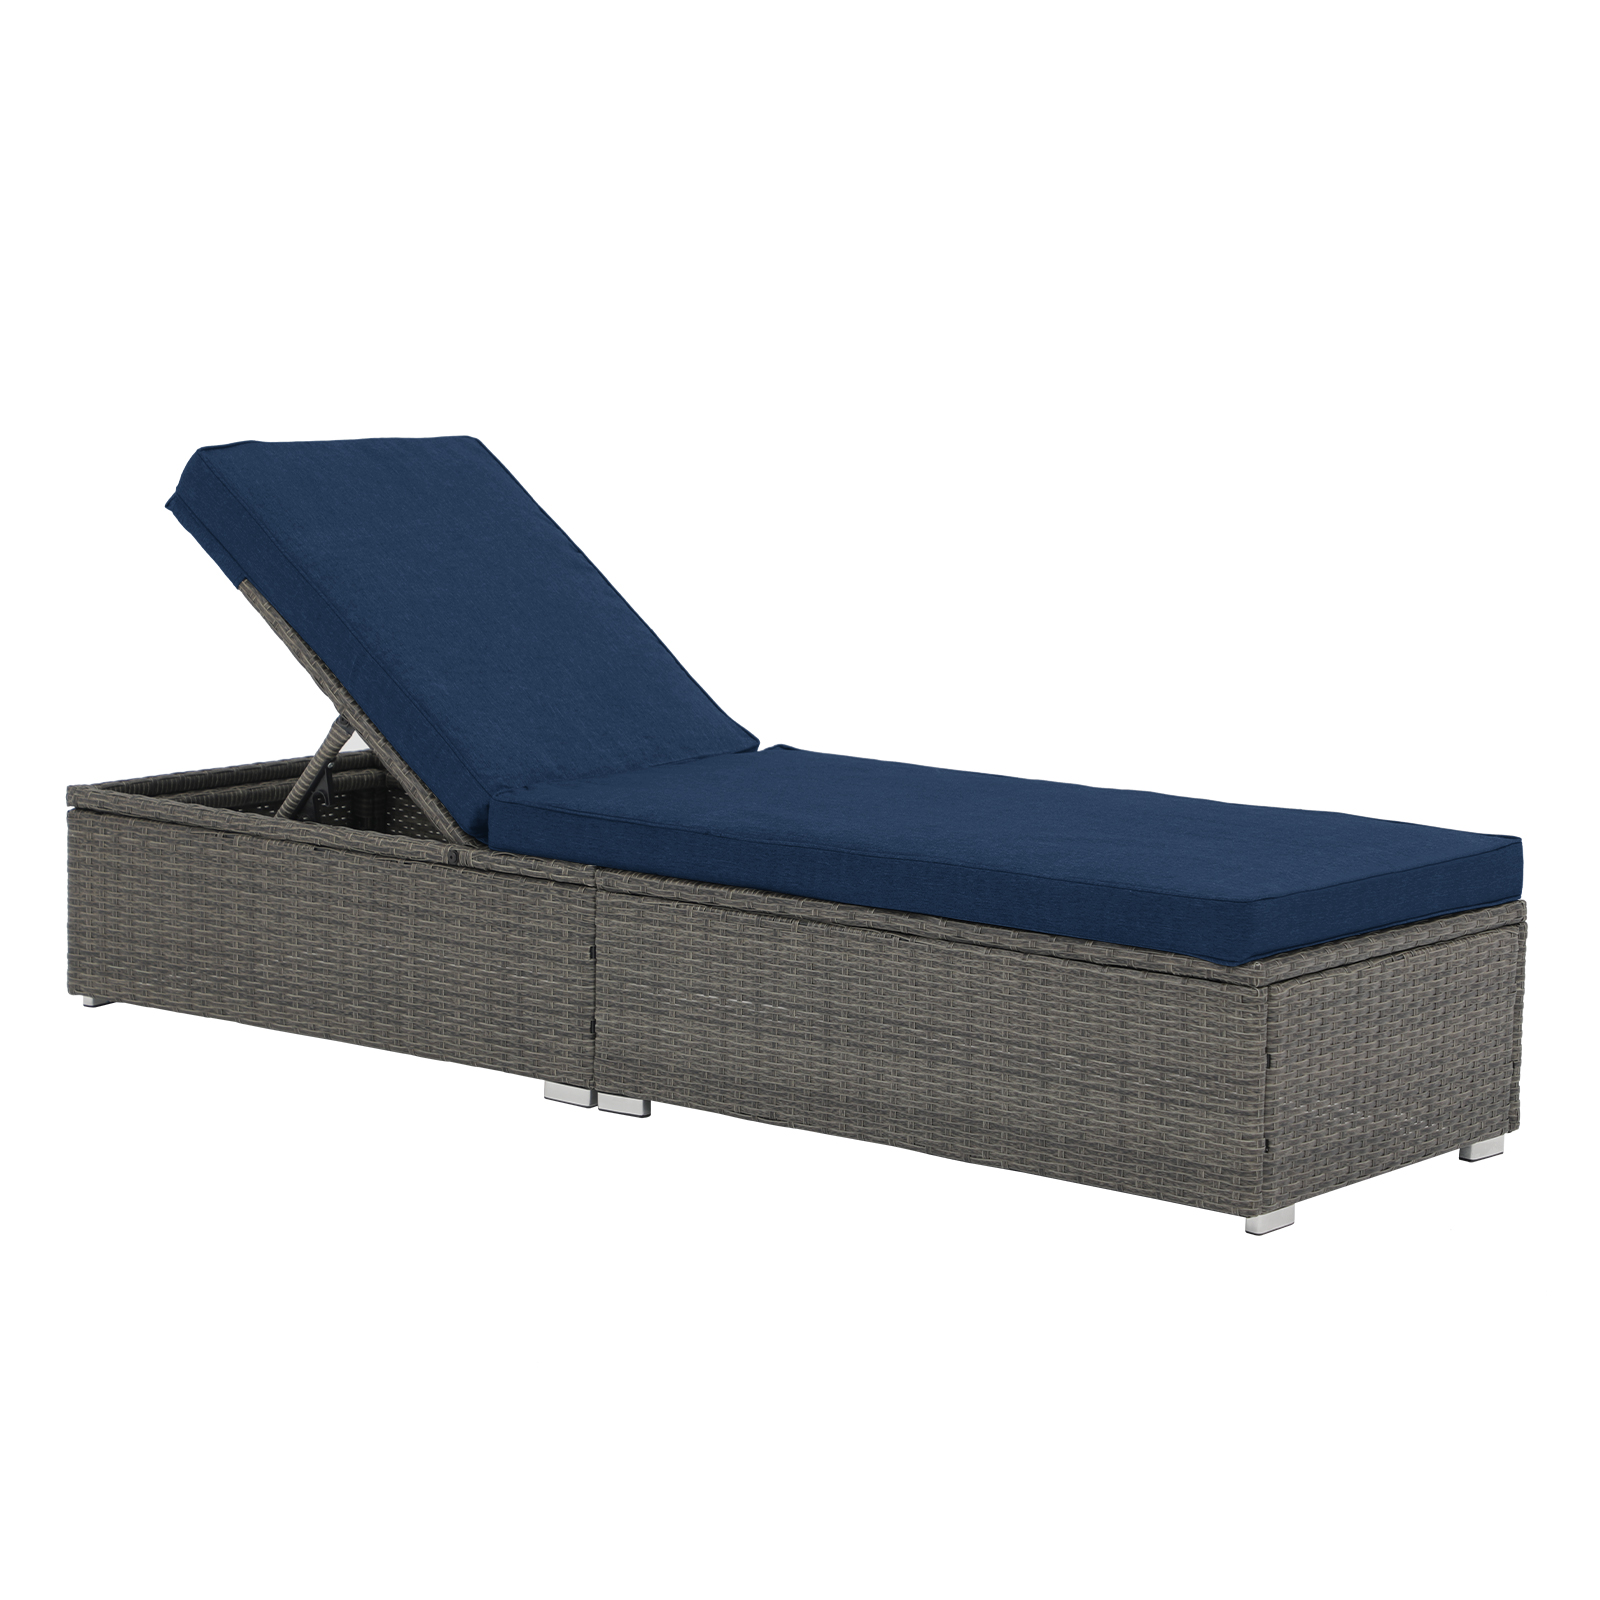 JOIVI Outdoor Chaise Lounge Chair, Patio Reclining Sun Lounger, Gray Wicker Rattan Adjustable Lounge Chair, Steel Frame with Removable Navy Blue Cushions, for Poolside, Deck and Backyard, 1 Pack - image 2 of 8